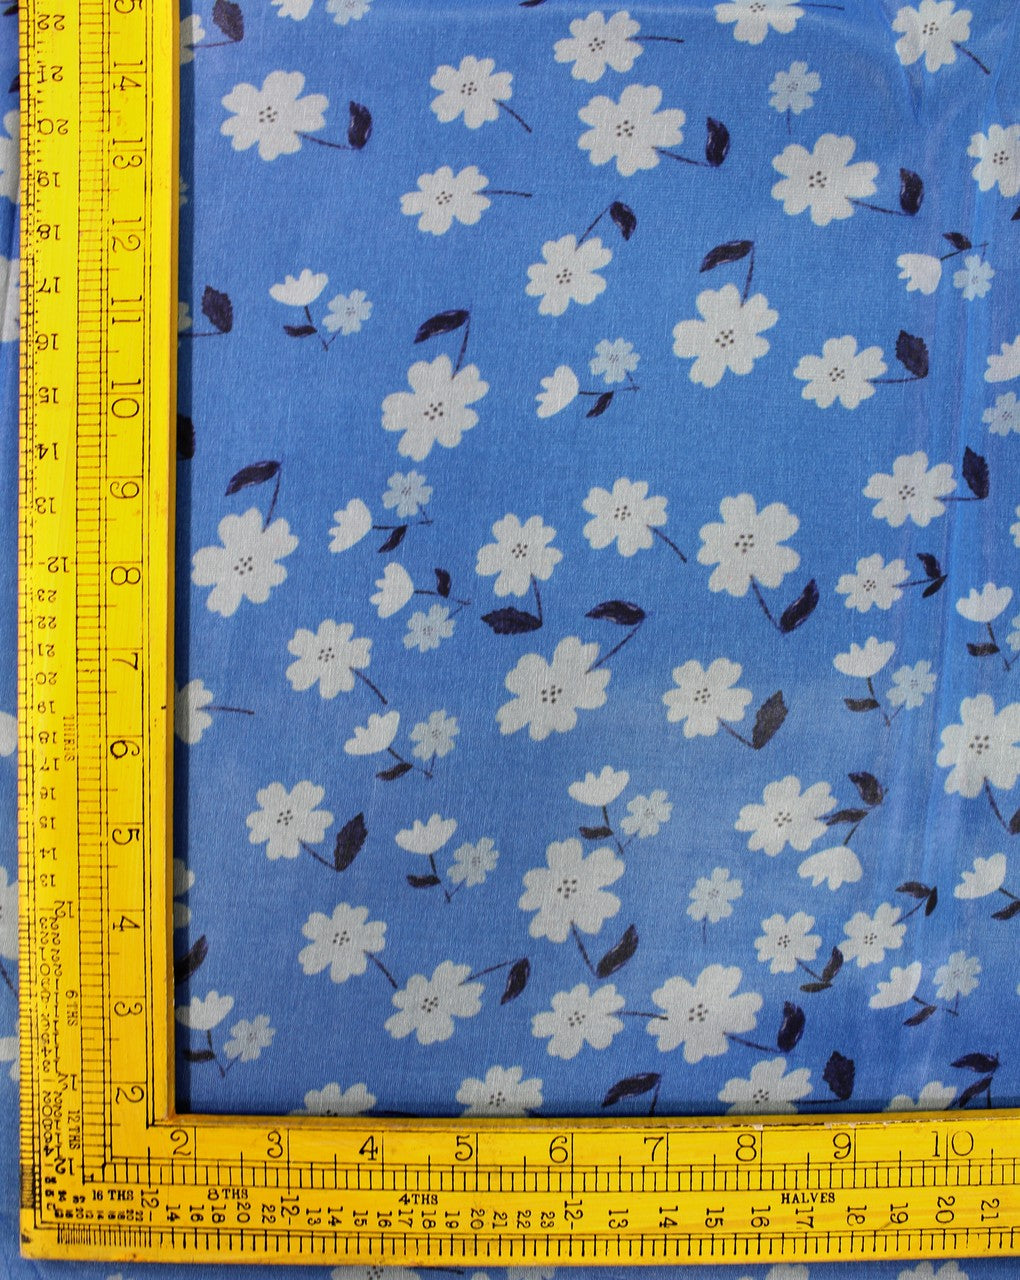 Blue And White Floral Design Polyester Organza Fabric